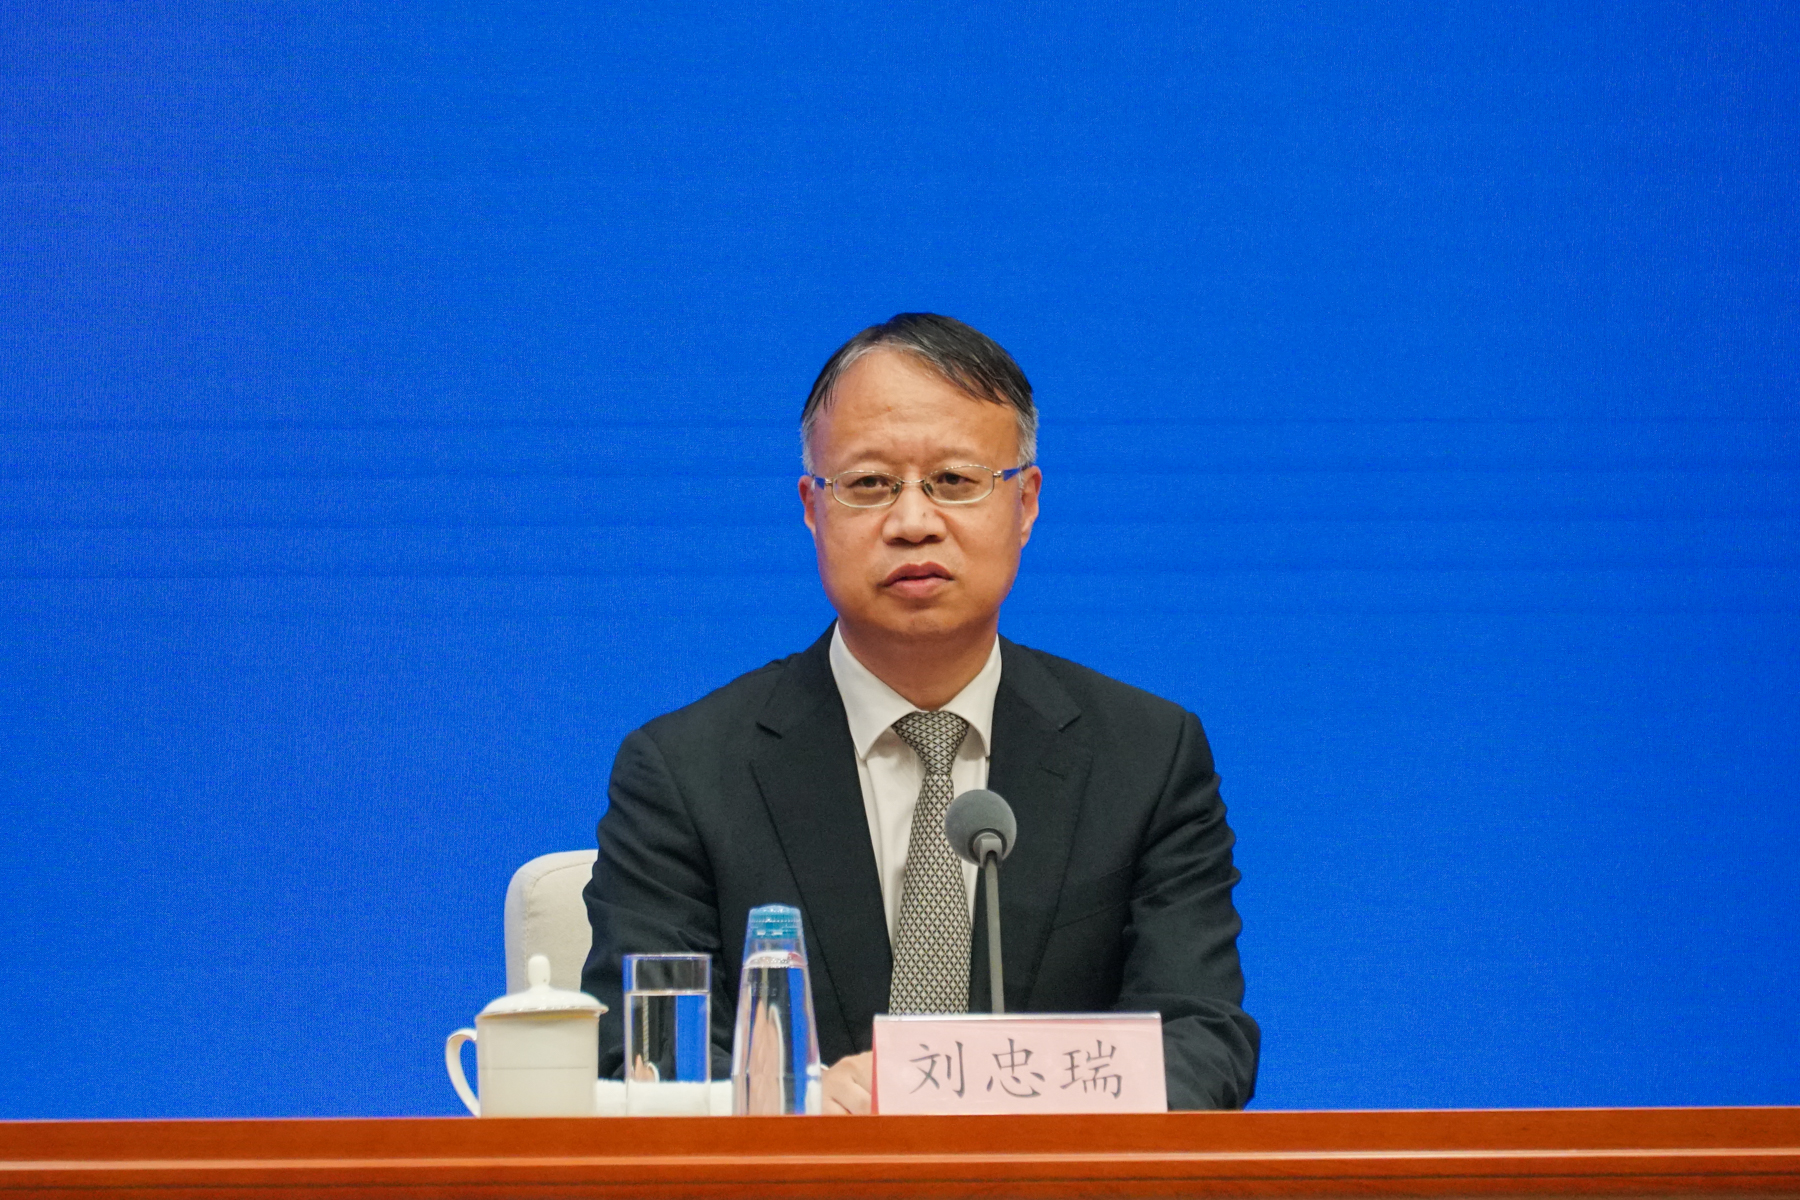 Liu Zhongrui, head of the statistical information and risk monitoring department of the China Banking and Insurance Regulatory Commission, photographed by reporter Zhou Yi